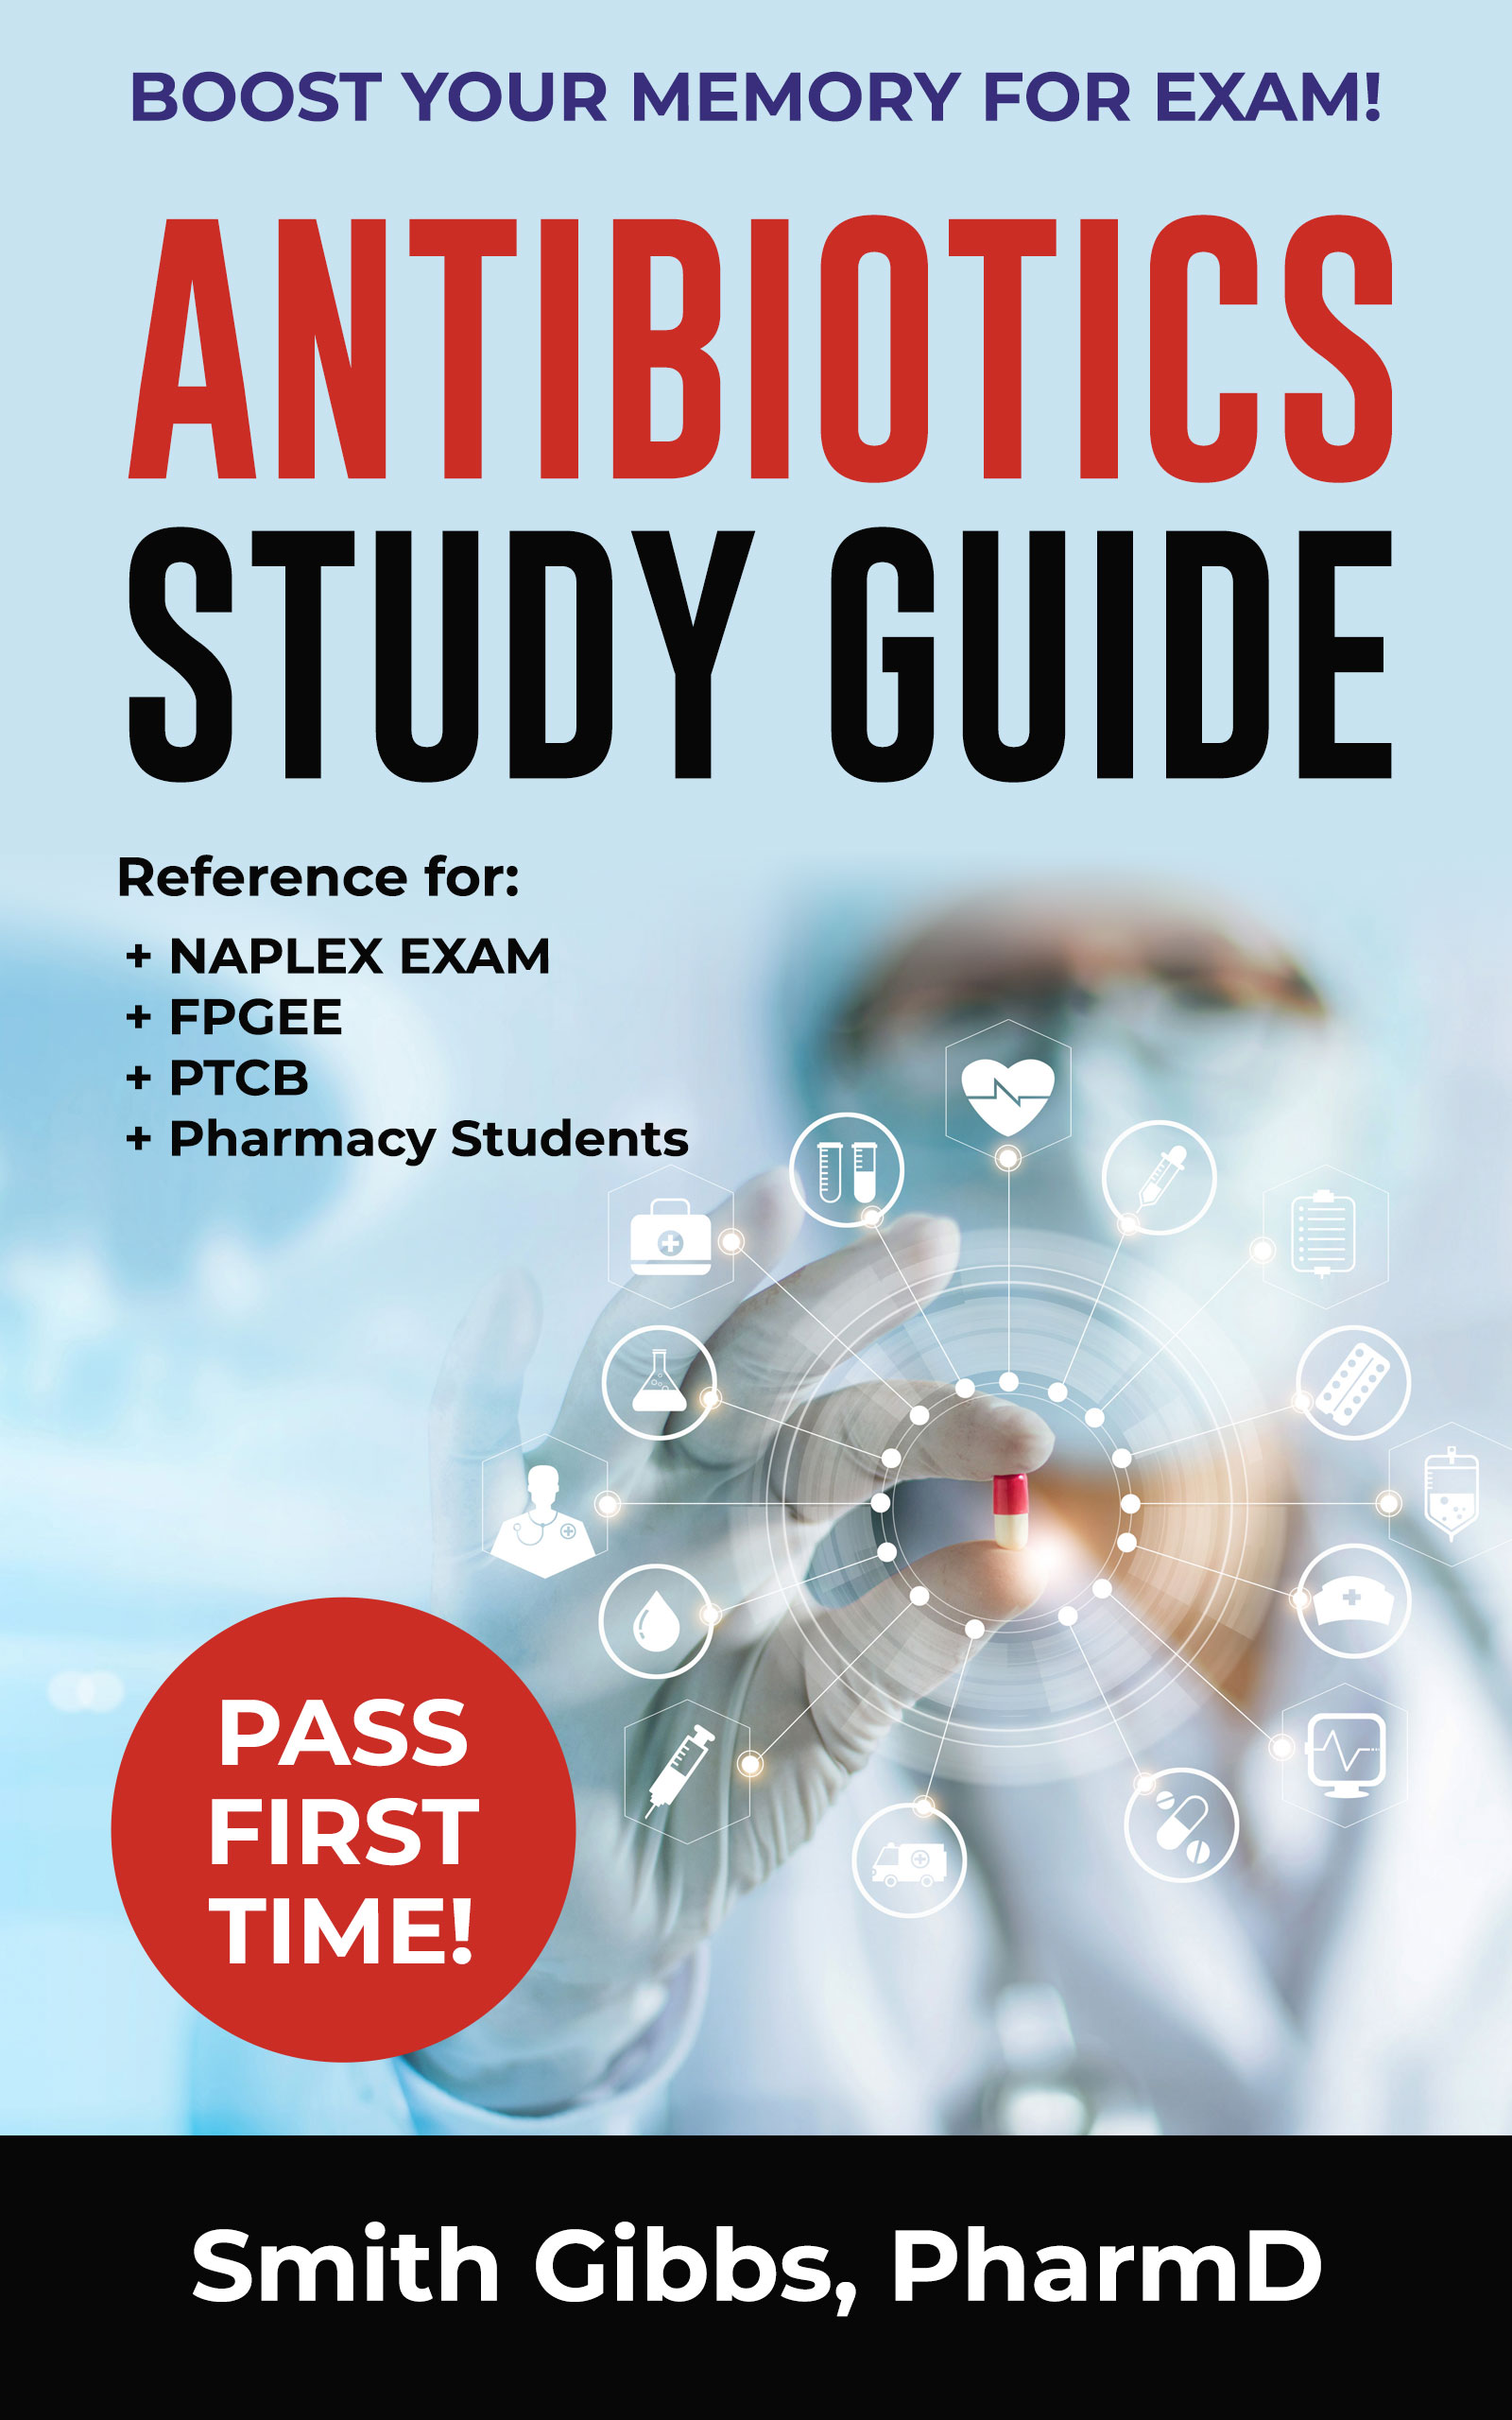 Antibiotics Study Guide: Boost Your Memory for Exam!